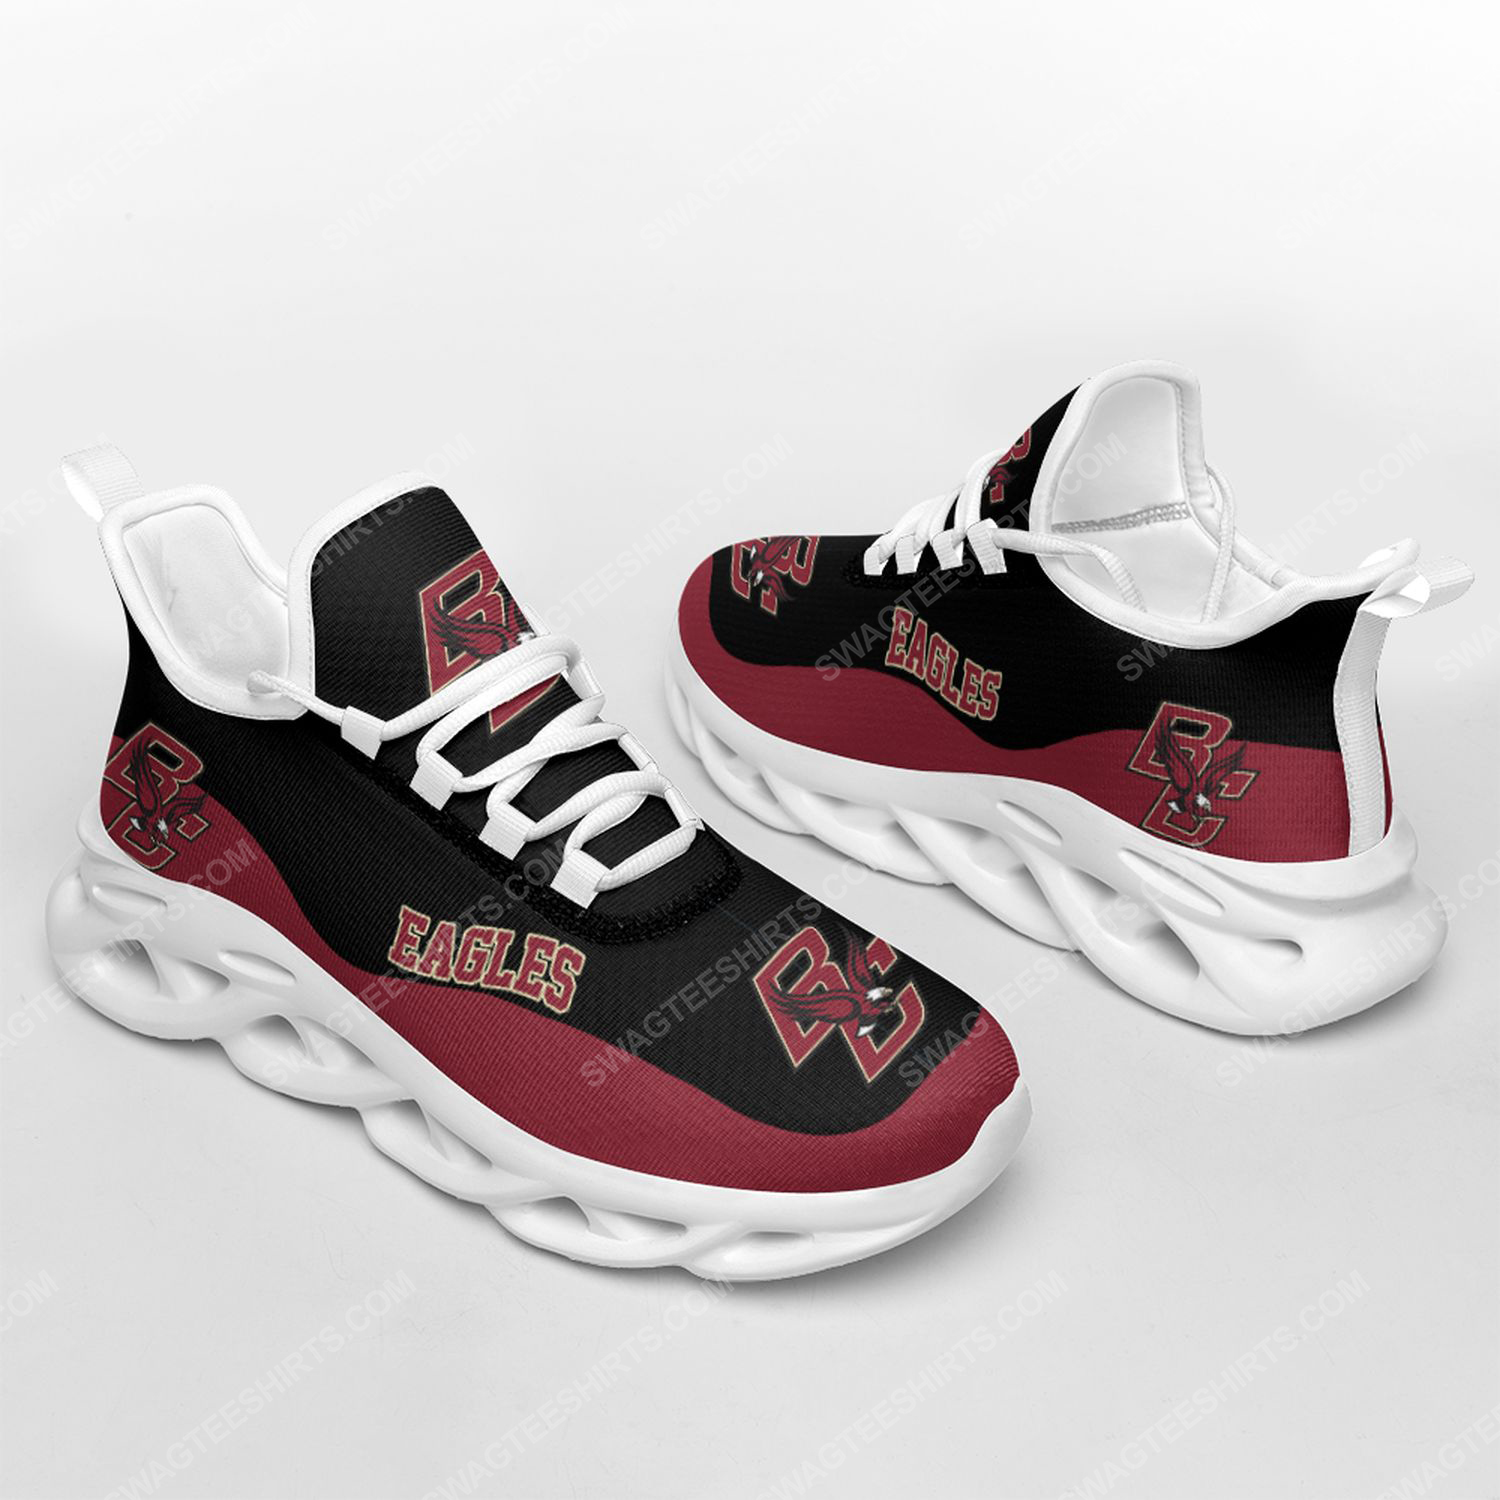 The boston college eagles football team max soul shoes 2